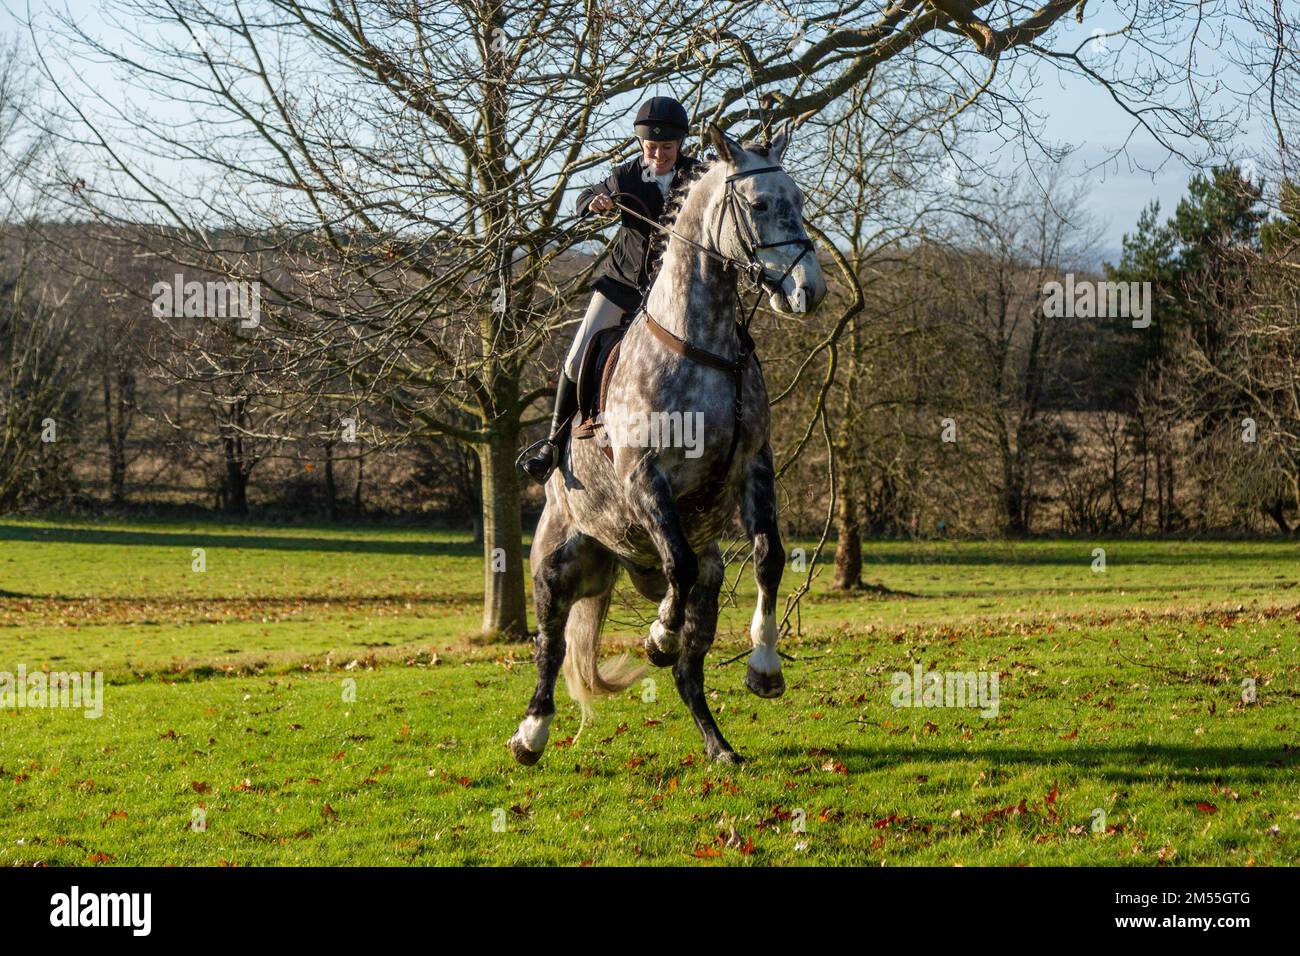 Hagley, Worcestershire, UK. 26th Dec, 2022. An excited horse jumps at the Albrighton and Woodland Hunt as they meet for the traditional Boxing Day hunt at Hagley Hall. Worcestershire, on a bright and sunny day. Credit: Peter Lopeman/Alamy Live News Stock Photo